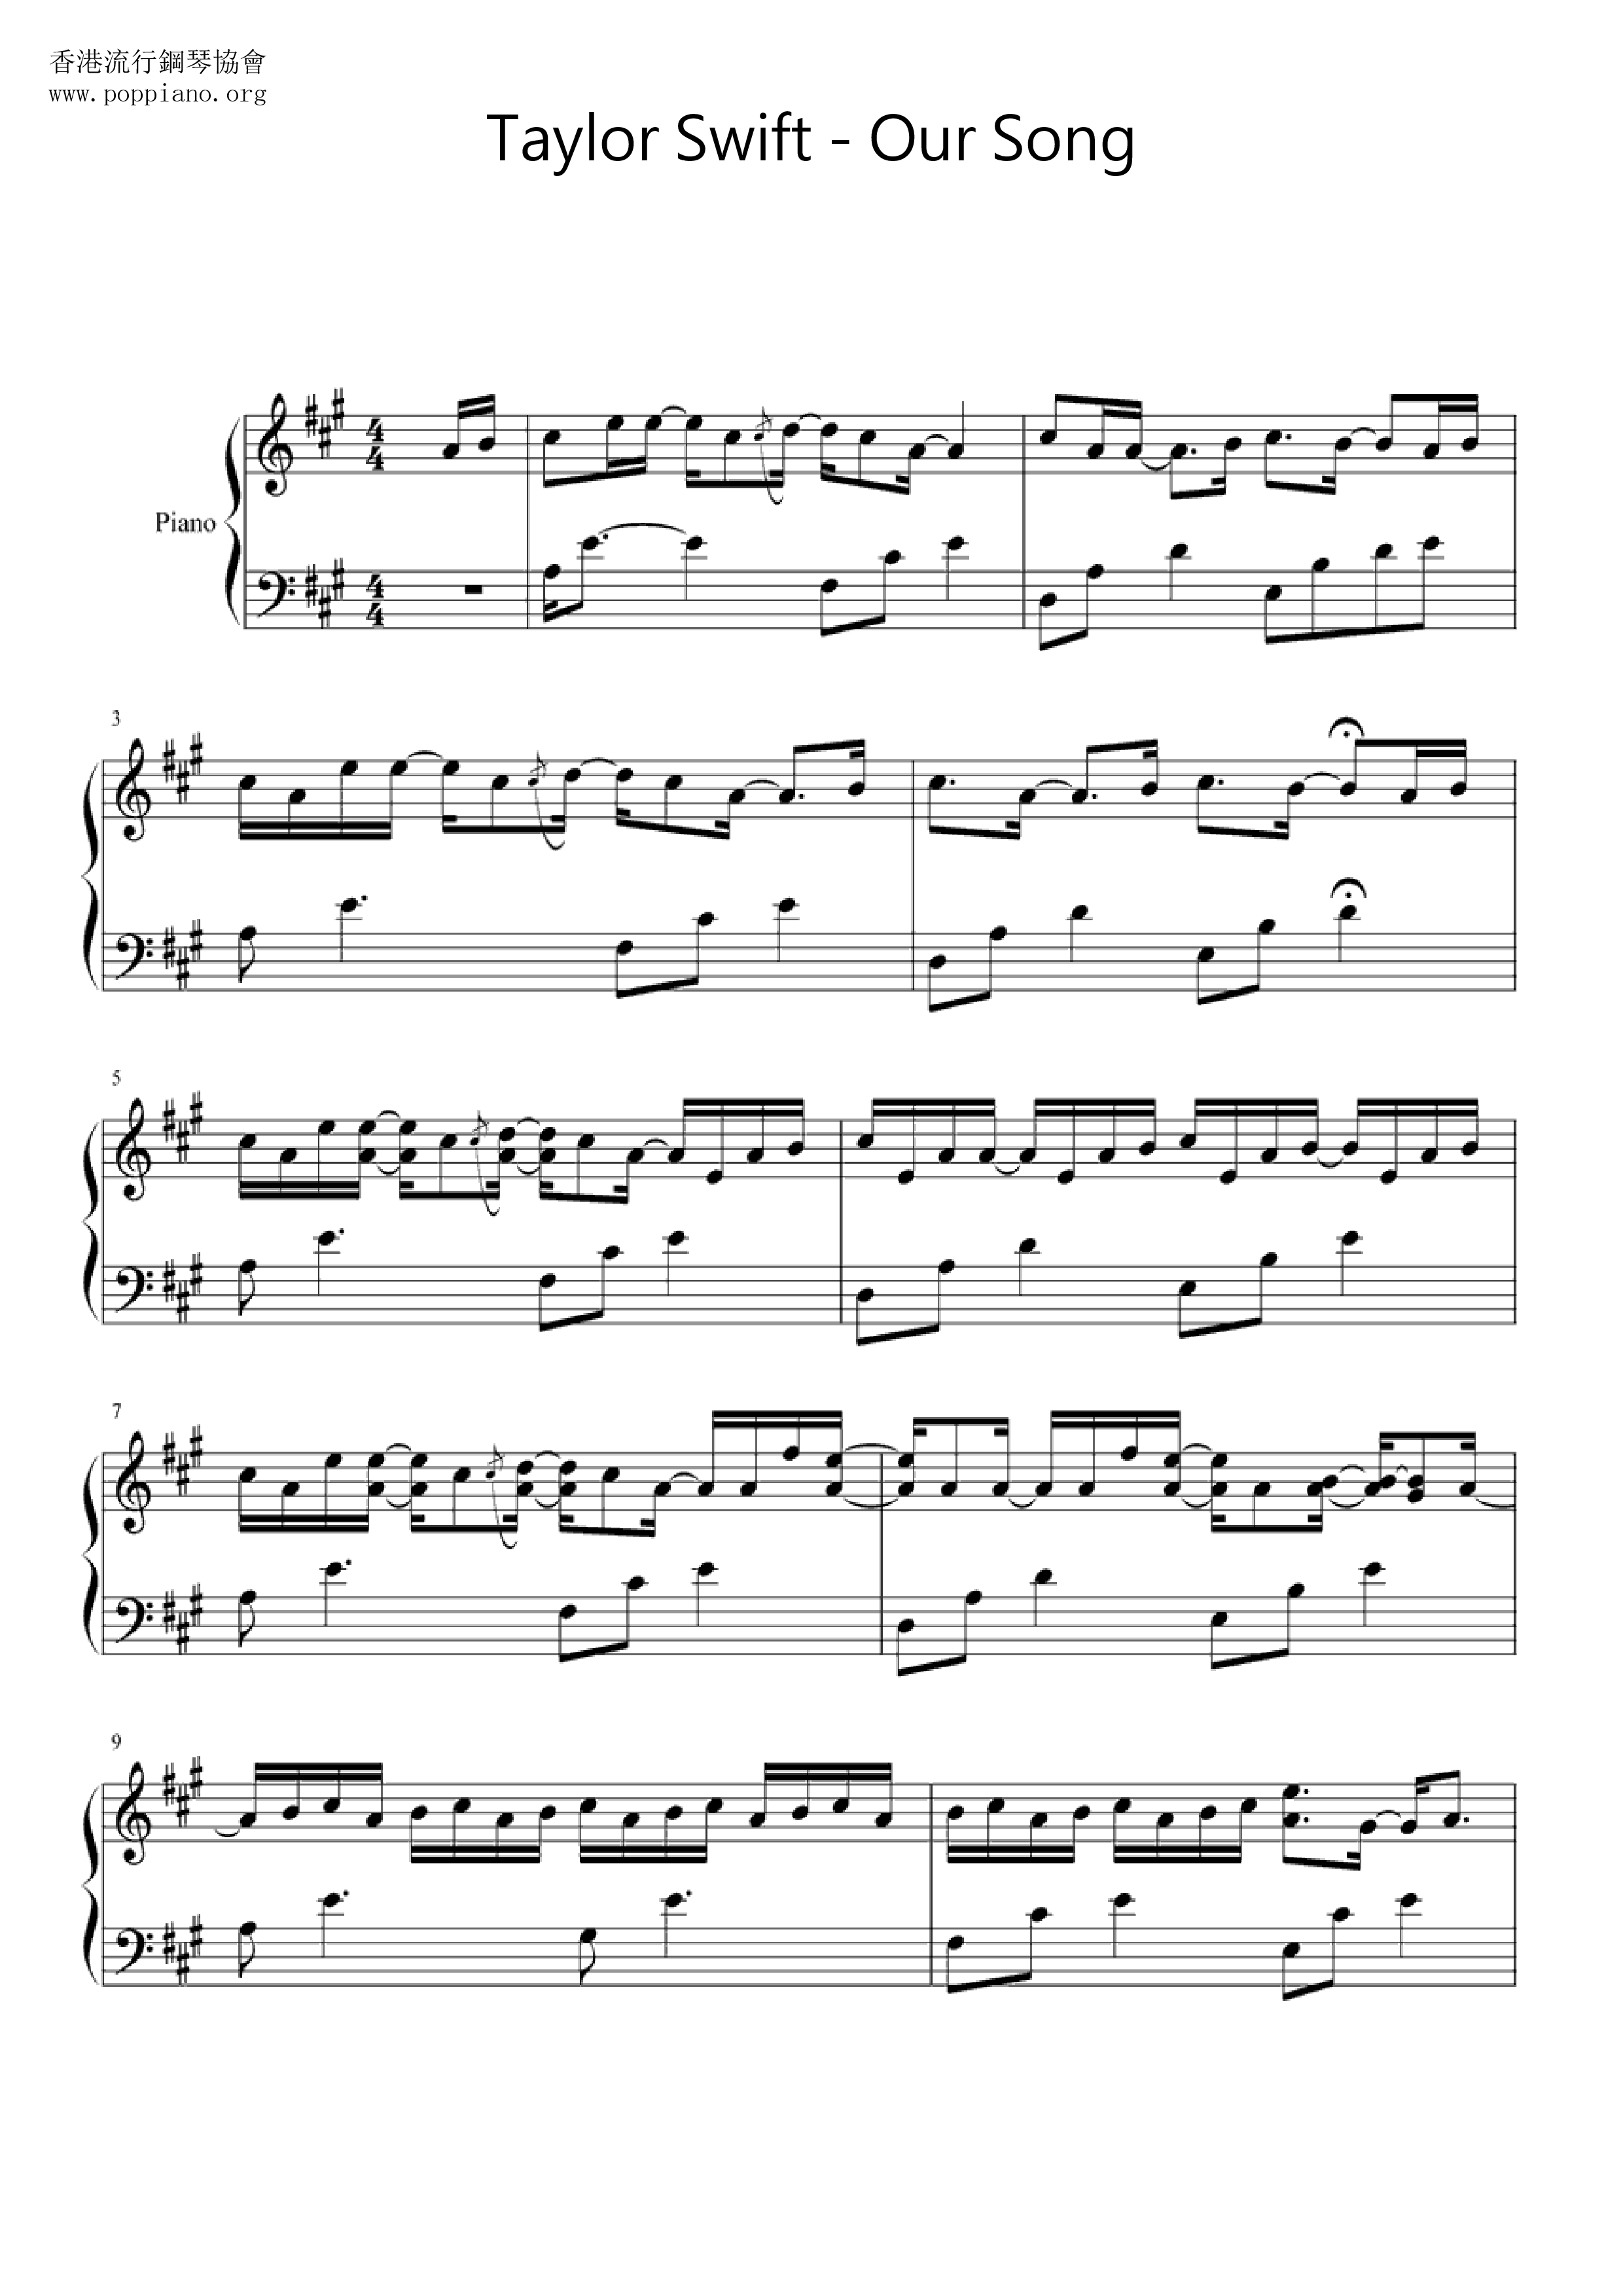 Our Song Score